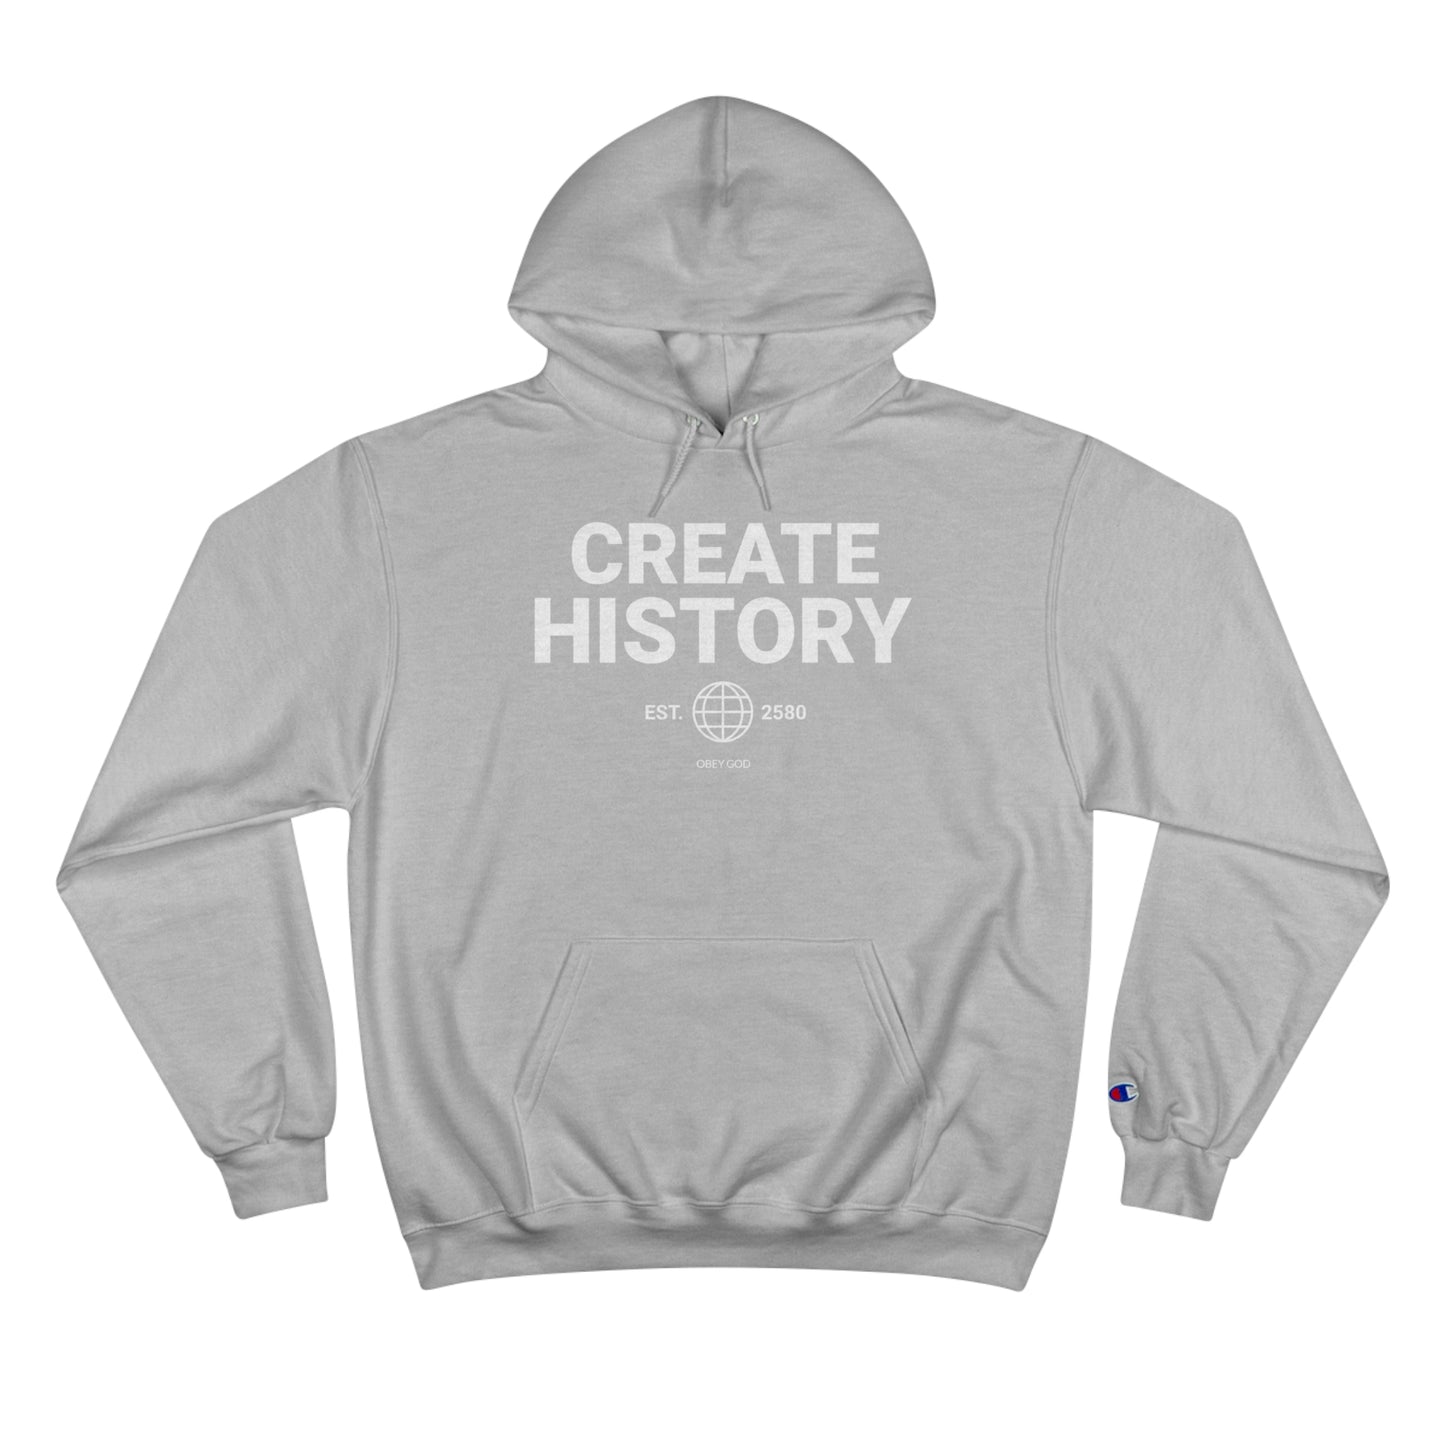 Elevate your style with our Create History Champion Hoodie. Crafted for champions, this hoodie blends comfort and quality with a bold design, making a statement wherever you go. Shop now and make history in style!